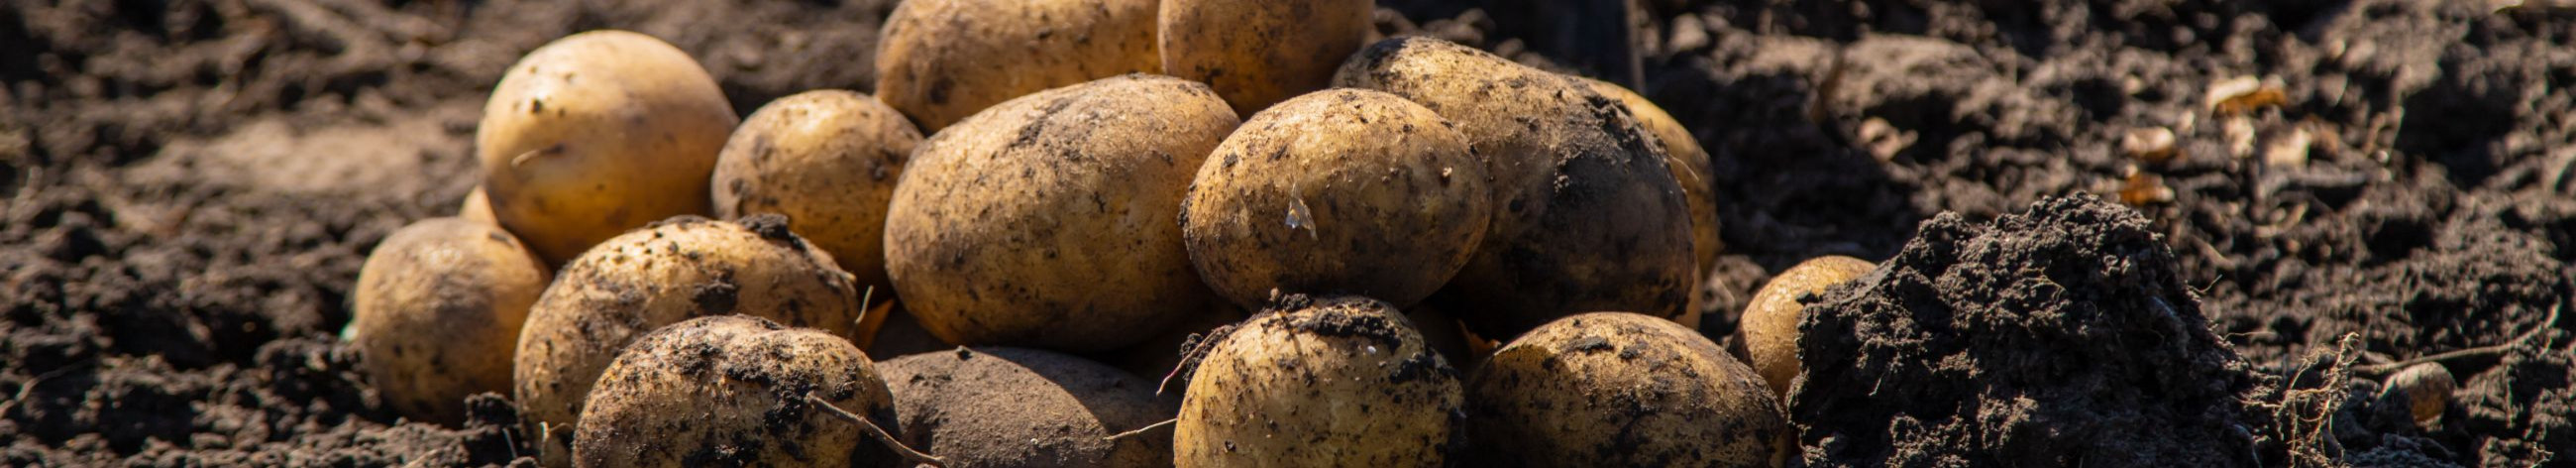 frost-resistant varieties, potato seeds e-shop, potato breeding investments, increasing yield, improving growth conditions, assortments, seed potatoes, seed potatoes, sale of potatoes, potato seed suppliers